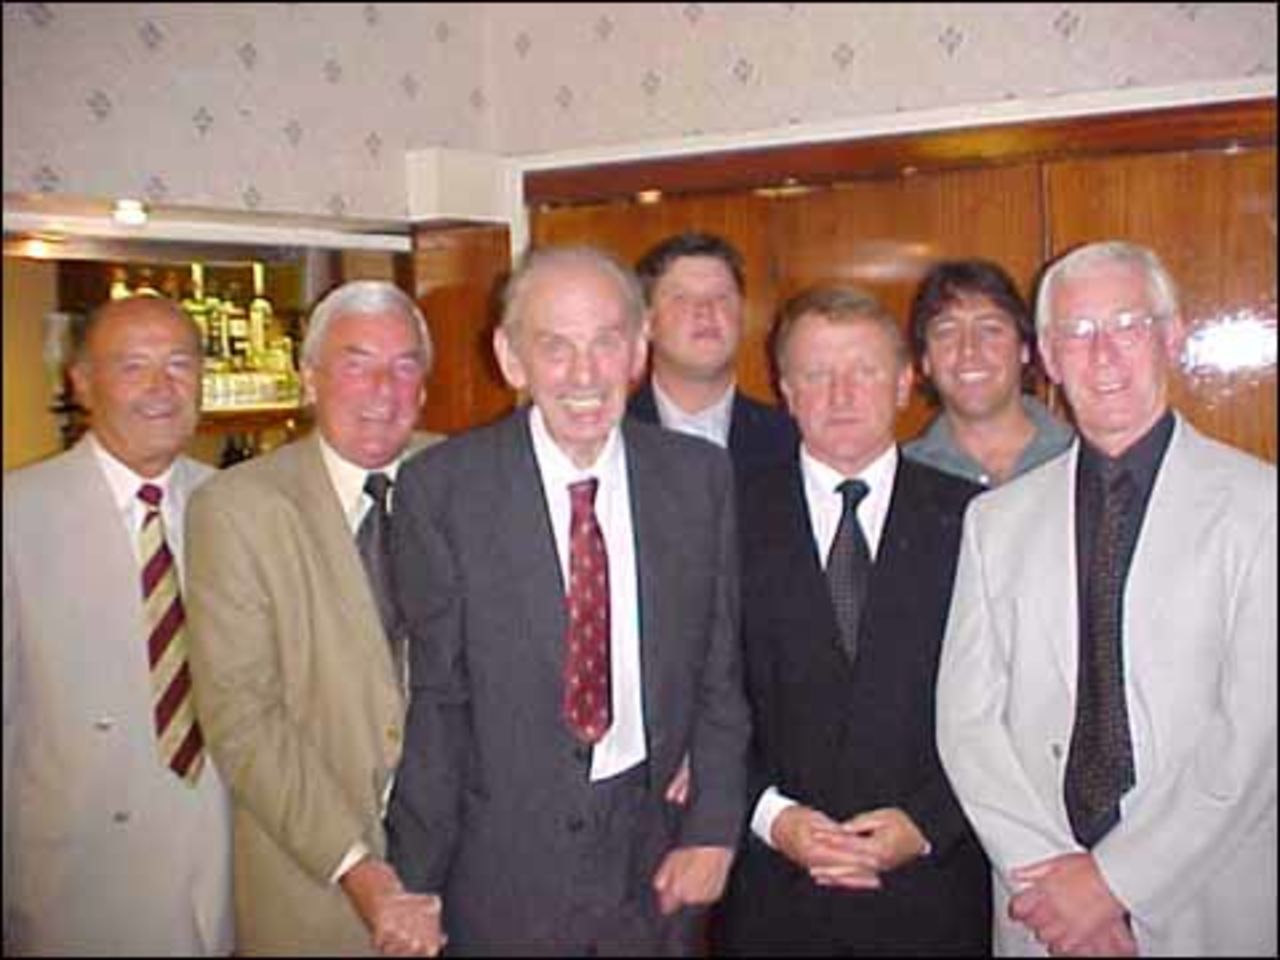 As were former club captains John Winter, Tony Holden, John Ingham, current skipper Paul Blackledge, Bobby Grimshaw, Andrew Sidley and Bryan Knowles